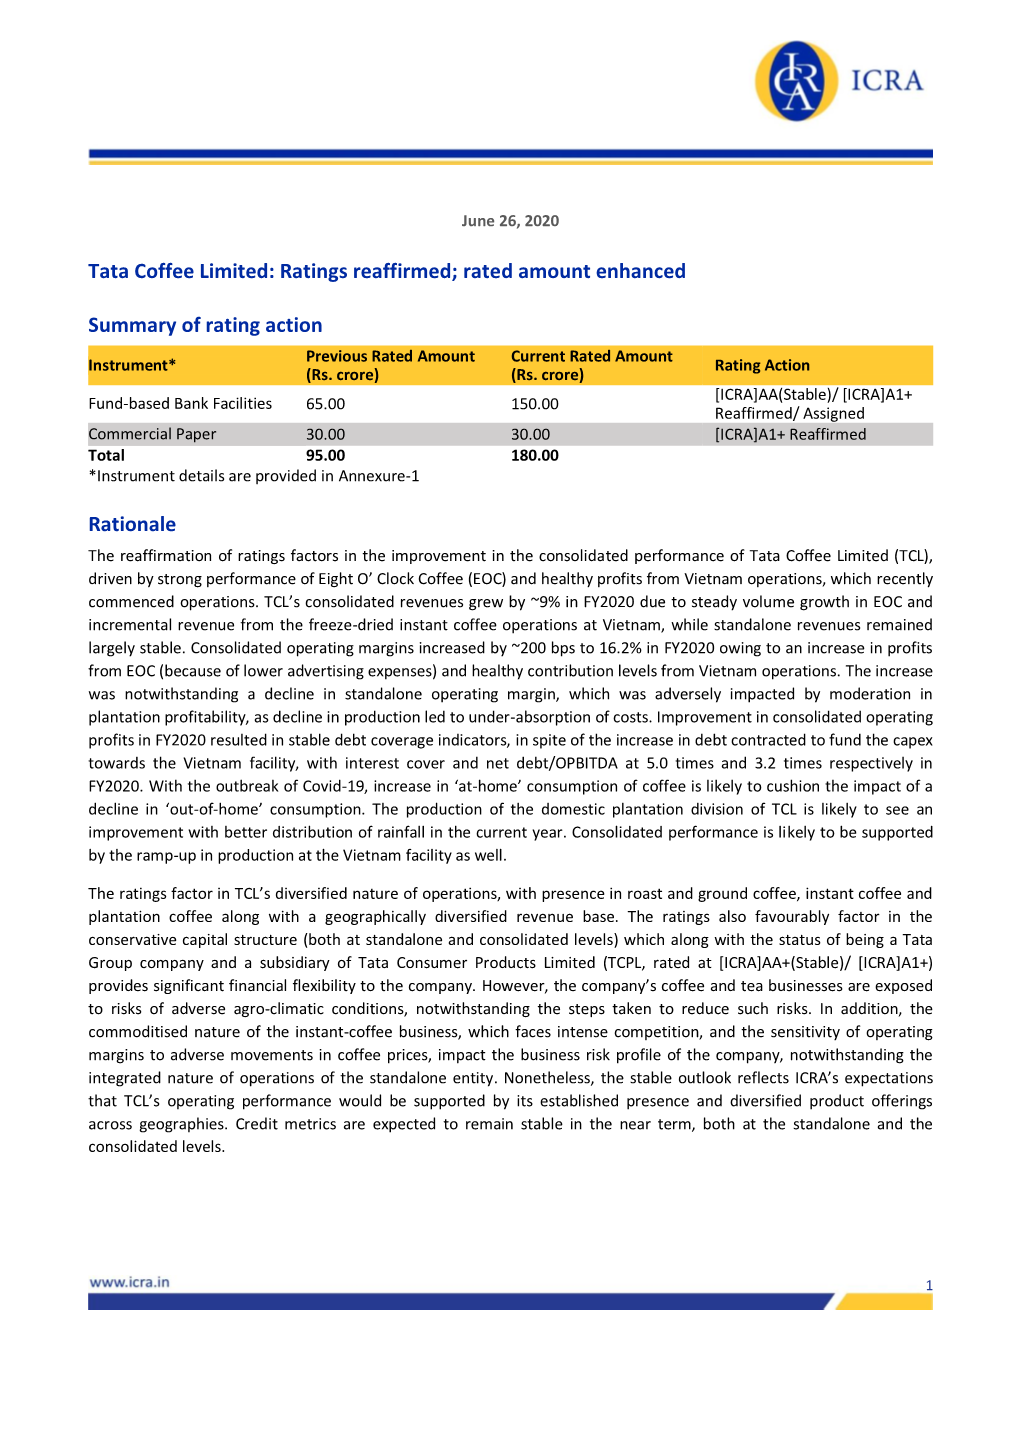 Tata Coffee Limited: Ratings Reaffirmed; Rated Amount Enhanced